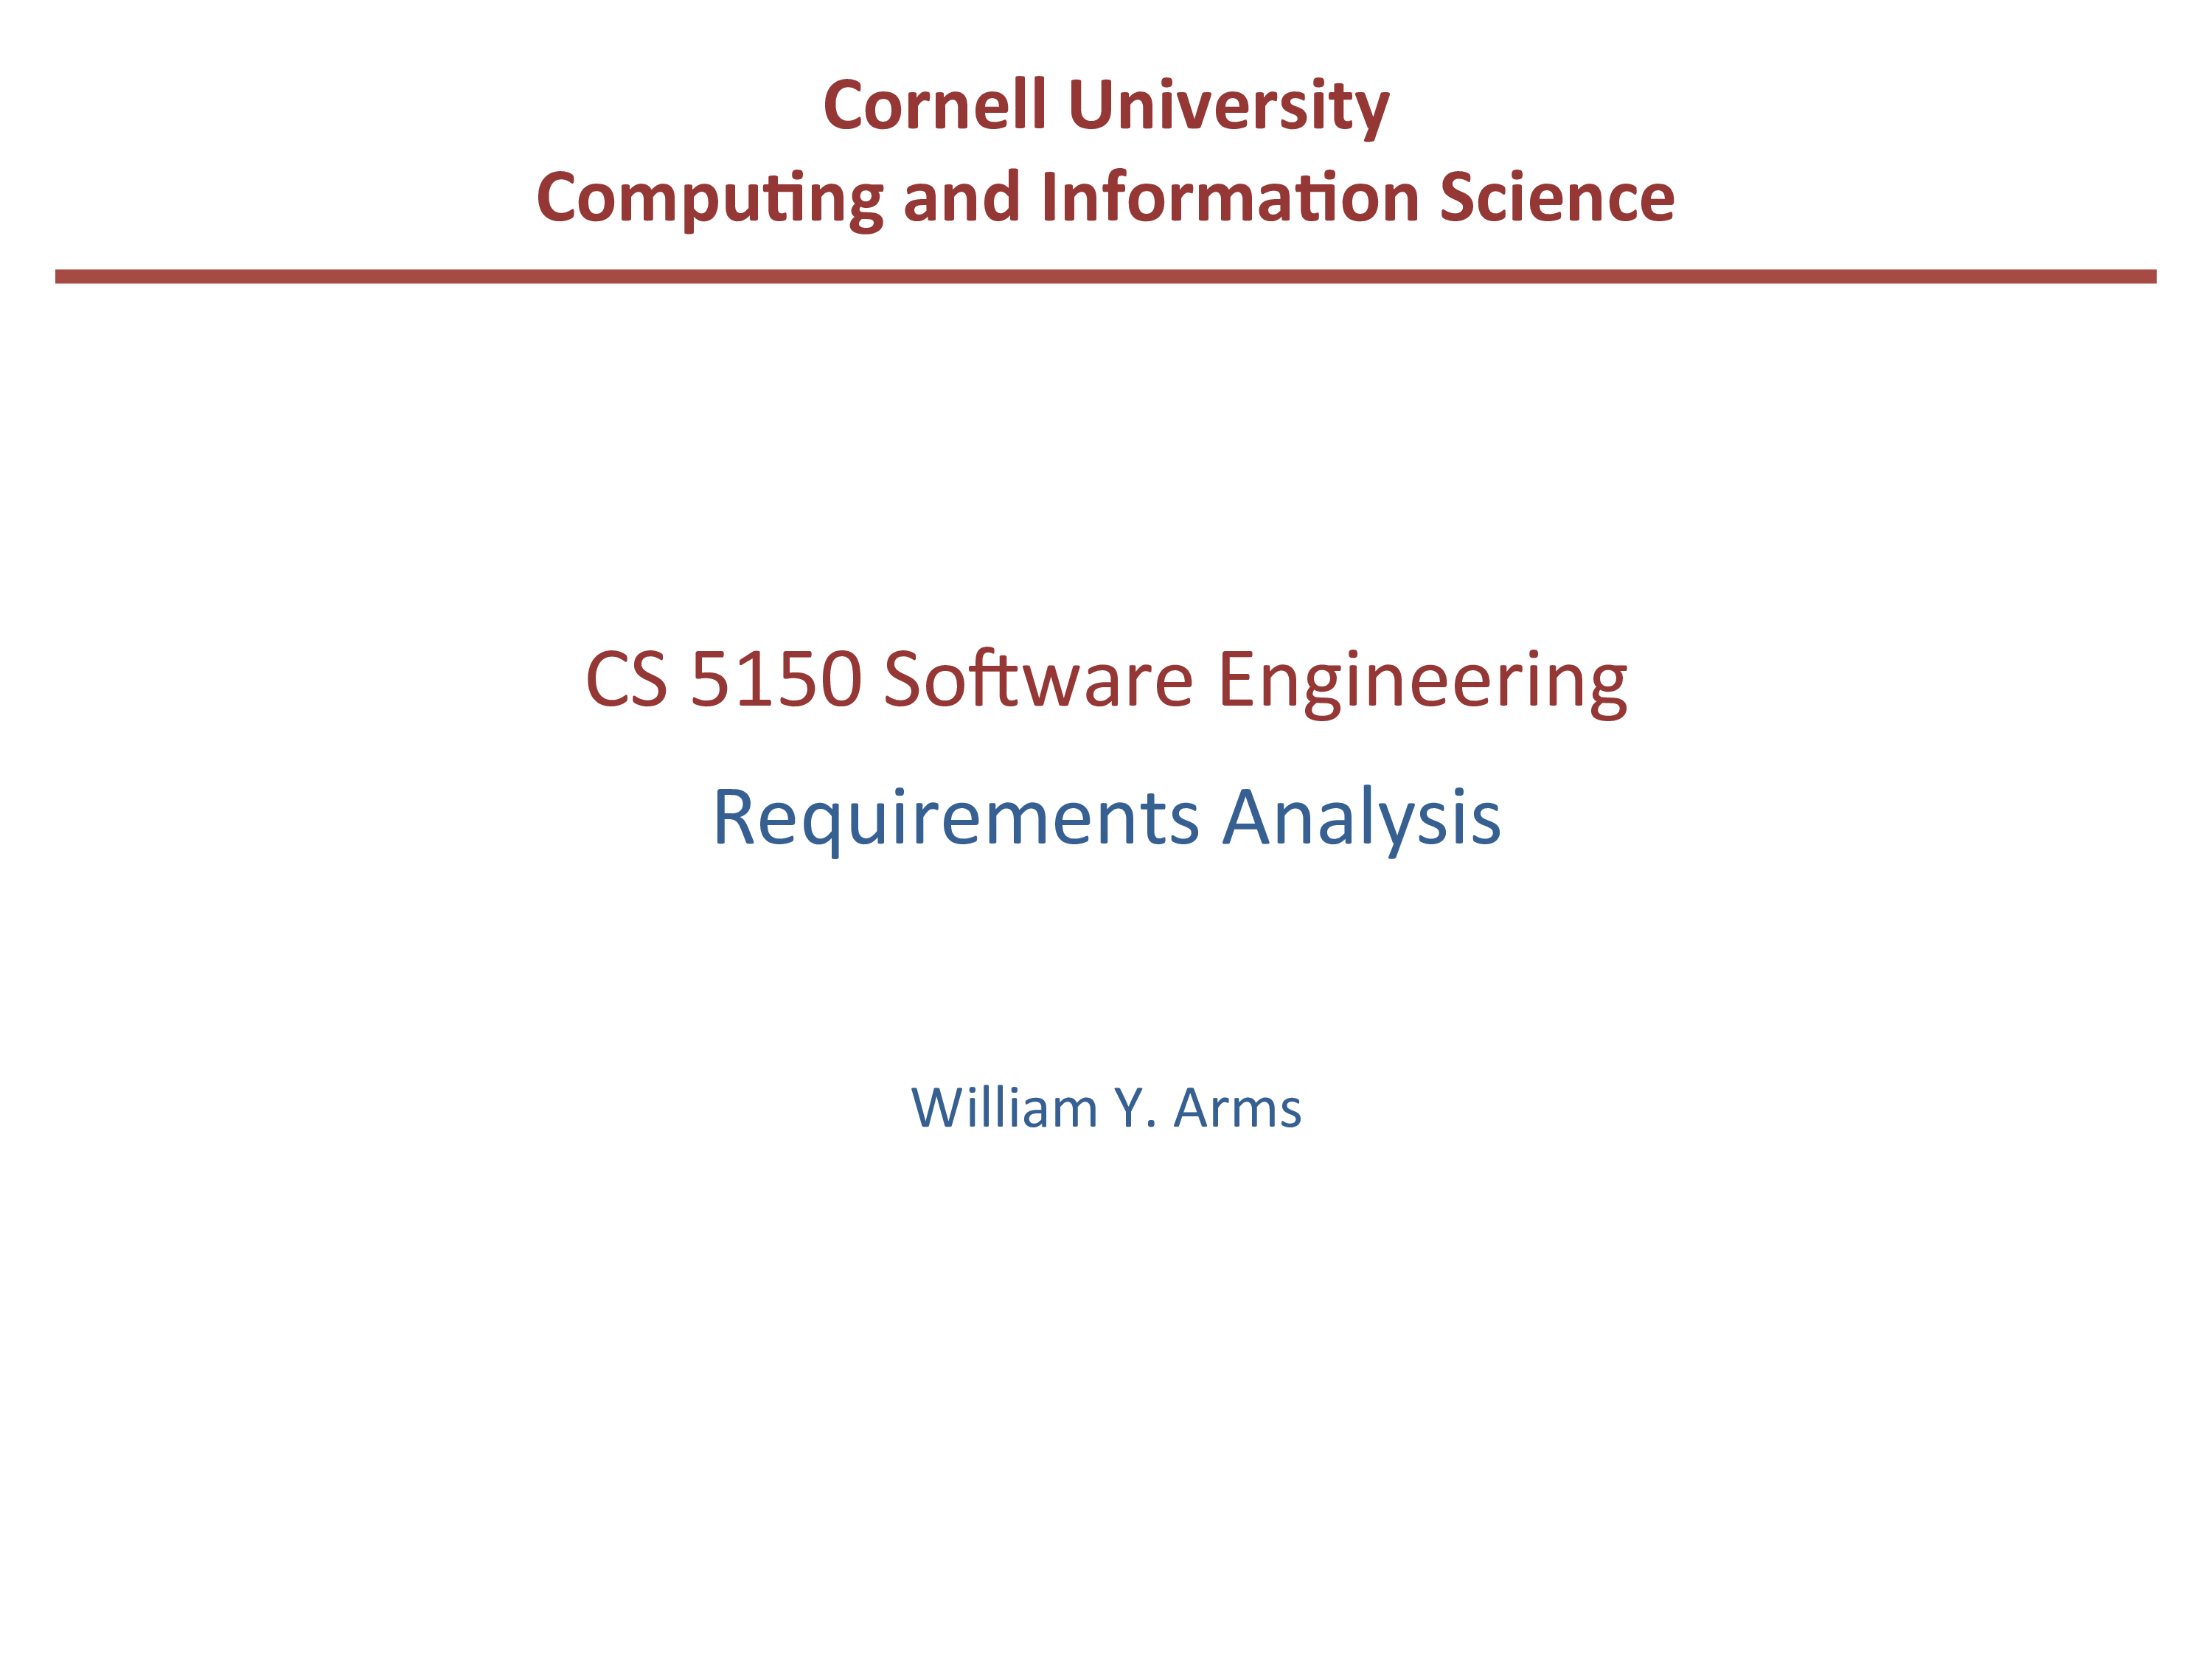 Software Engineering Requirements Analysis main image